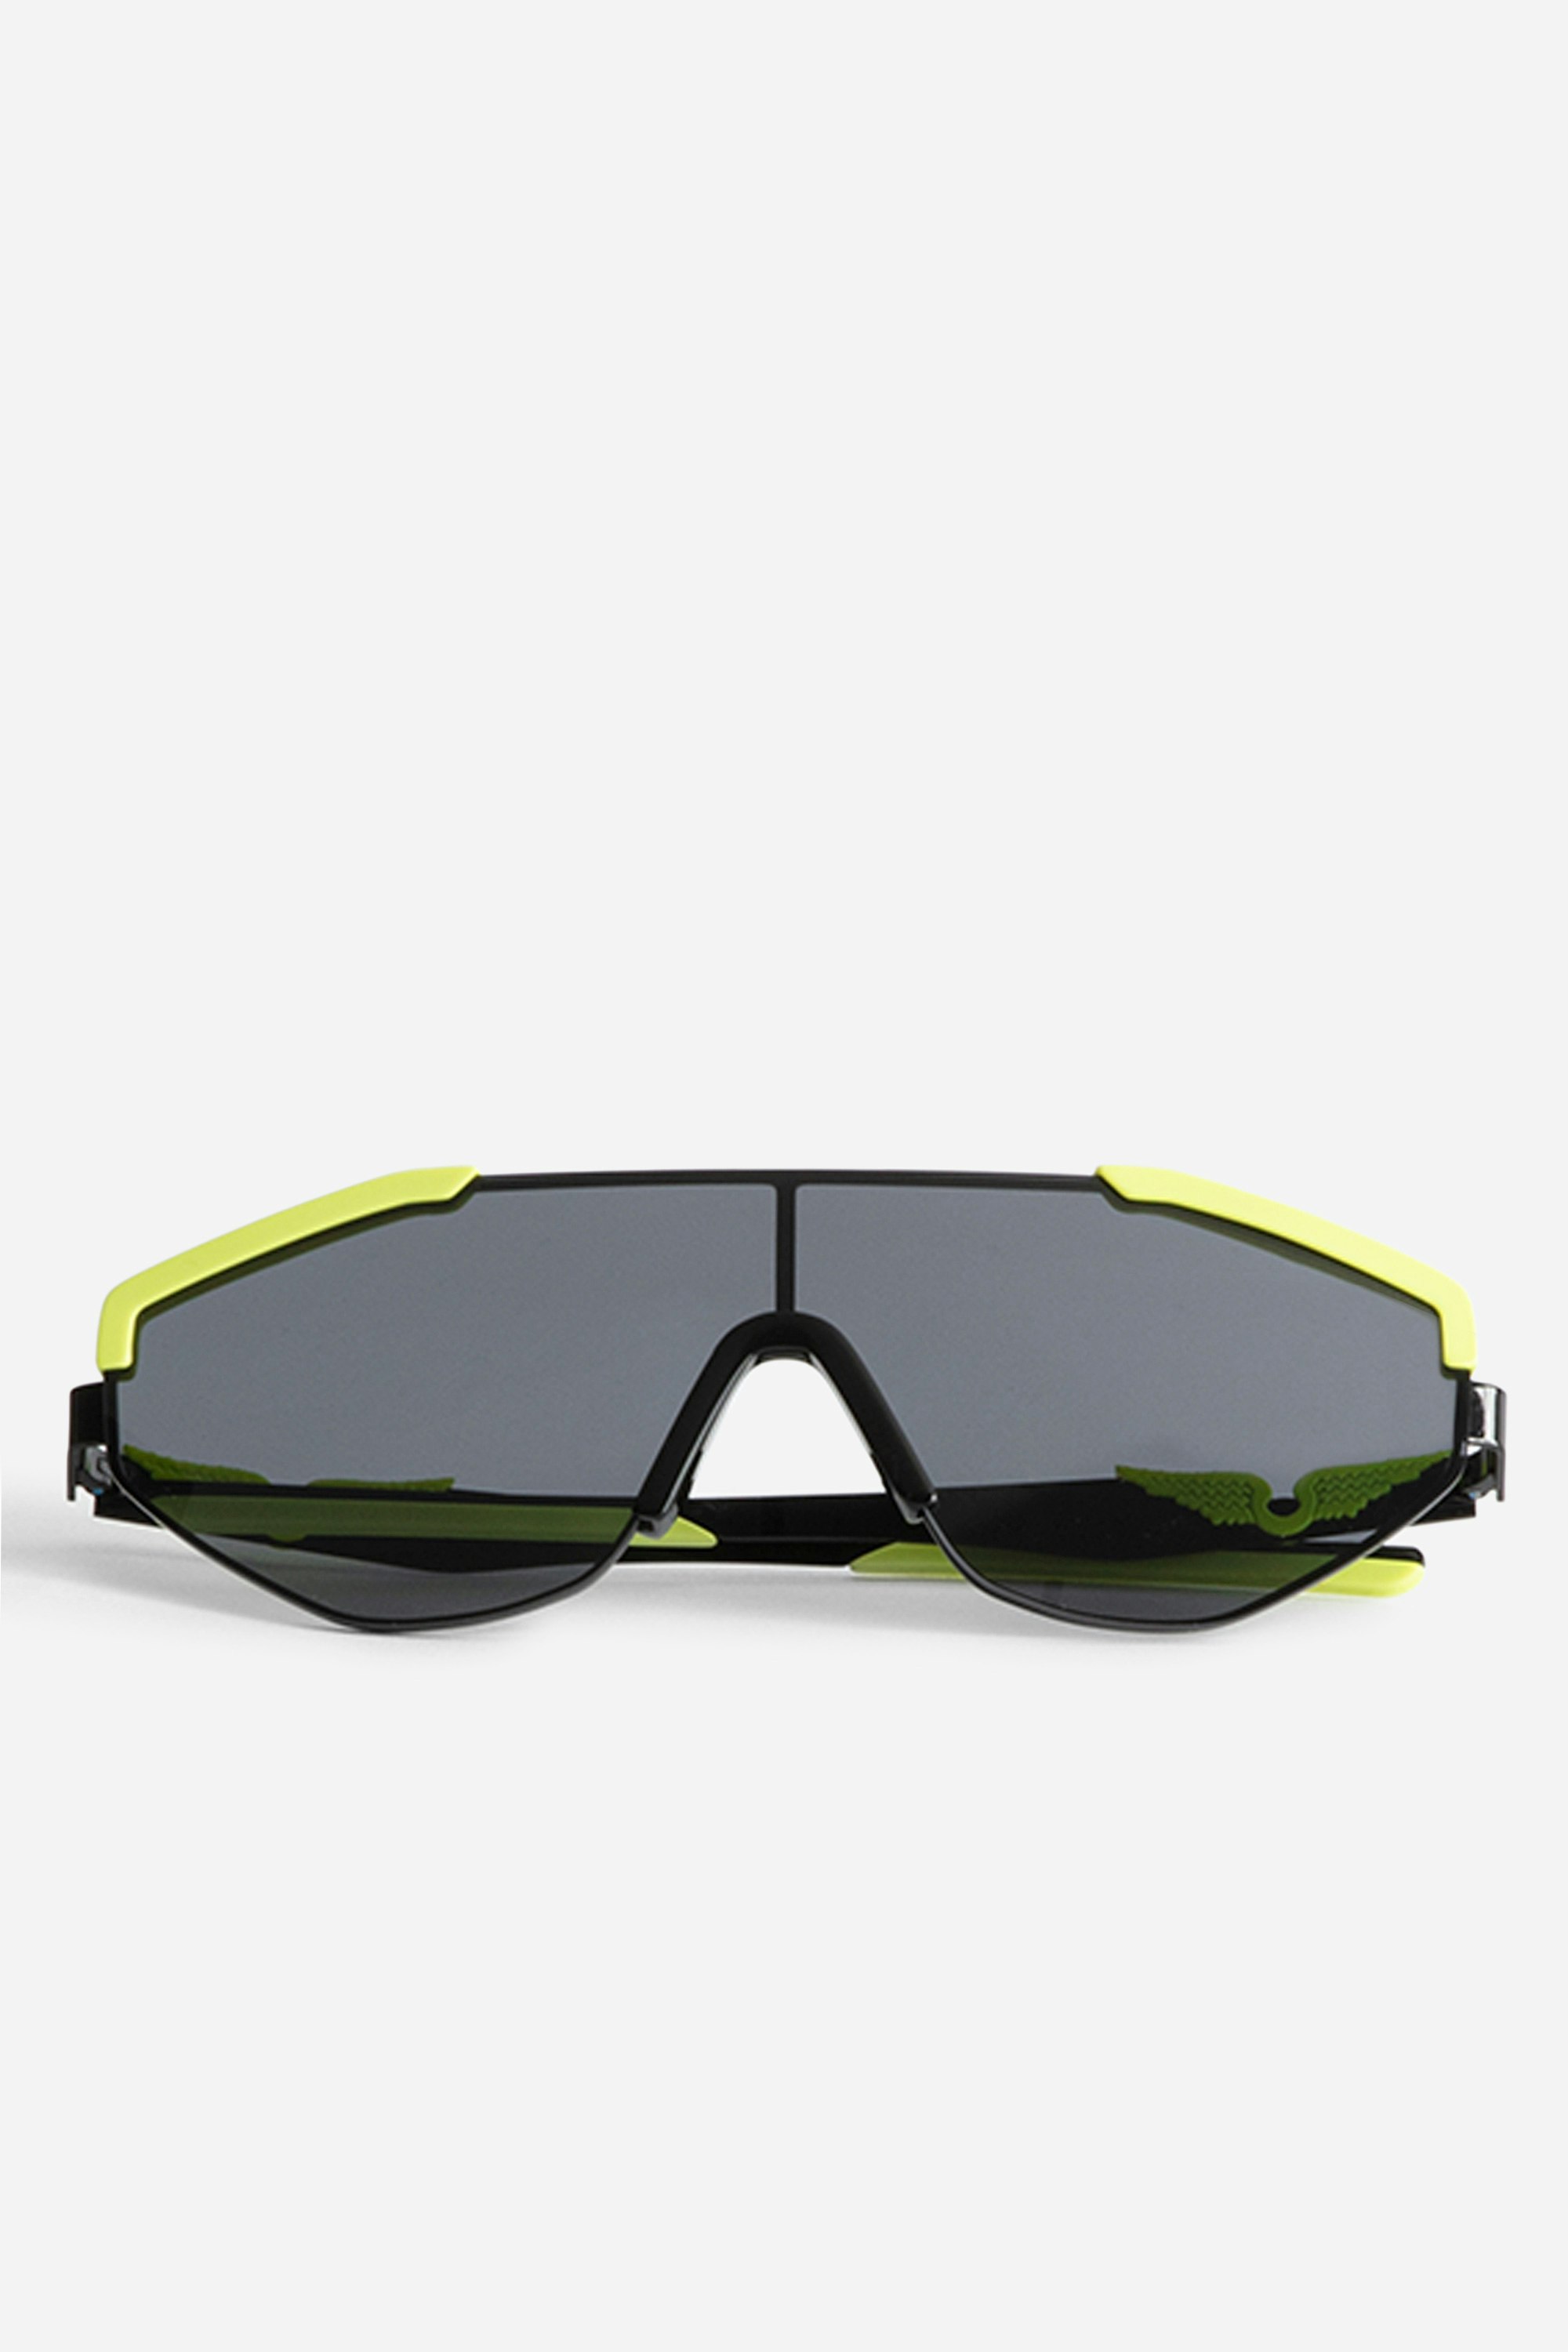 Runway Sunglasses - Unisex sunglasses with wing motif on temples.